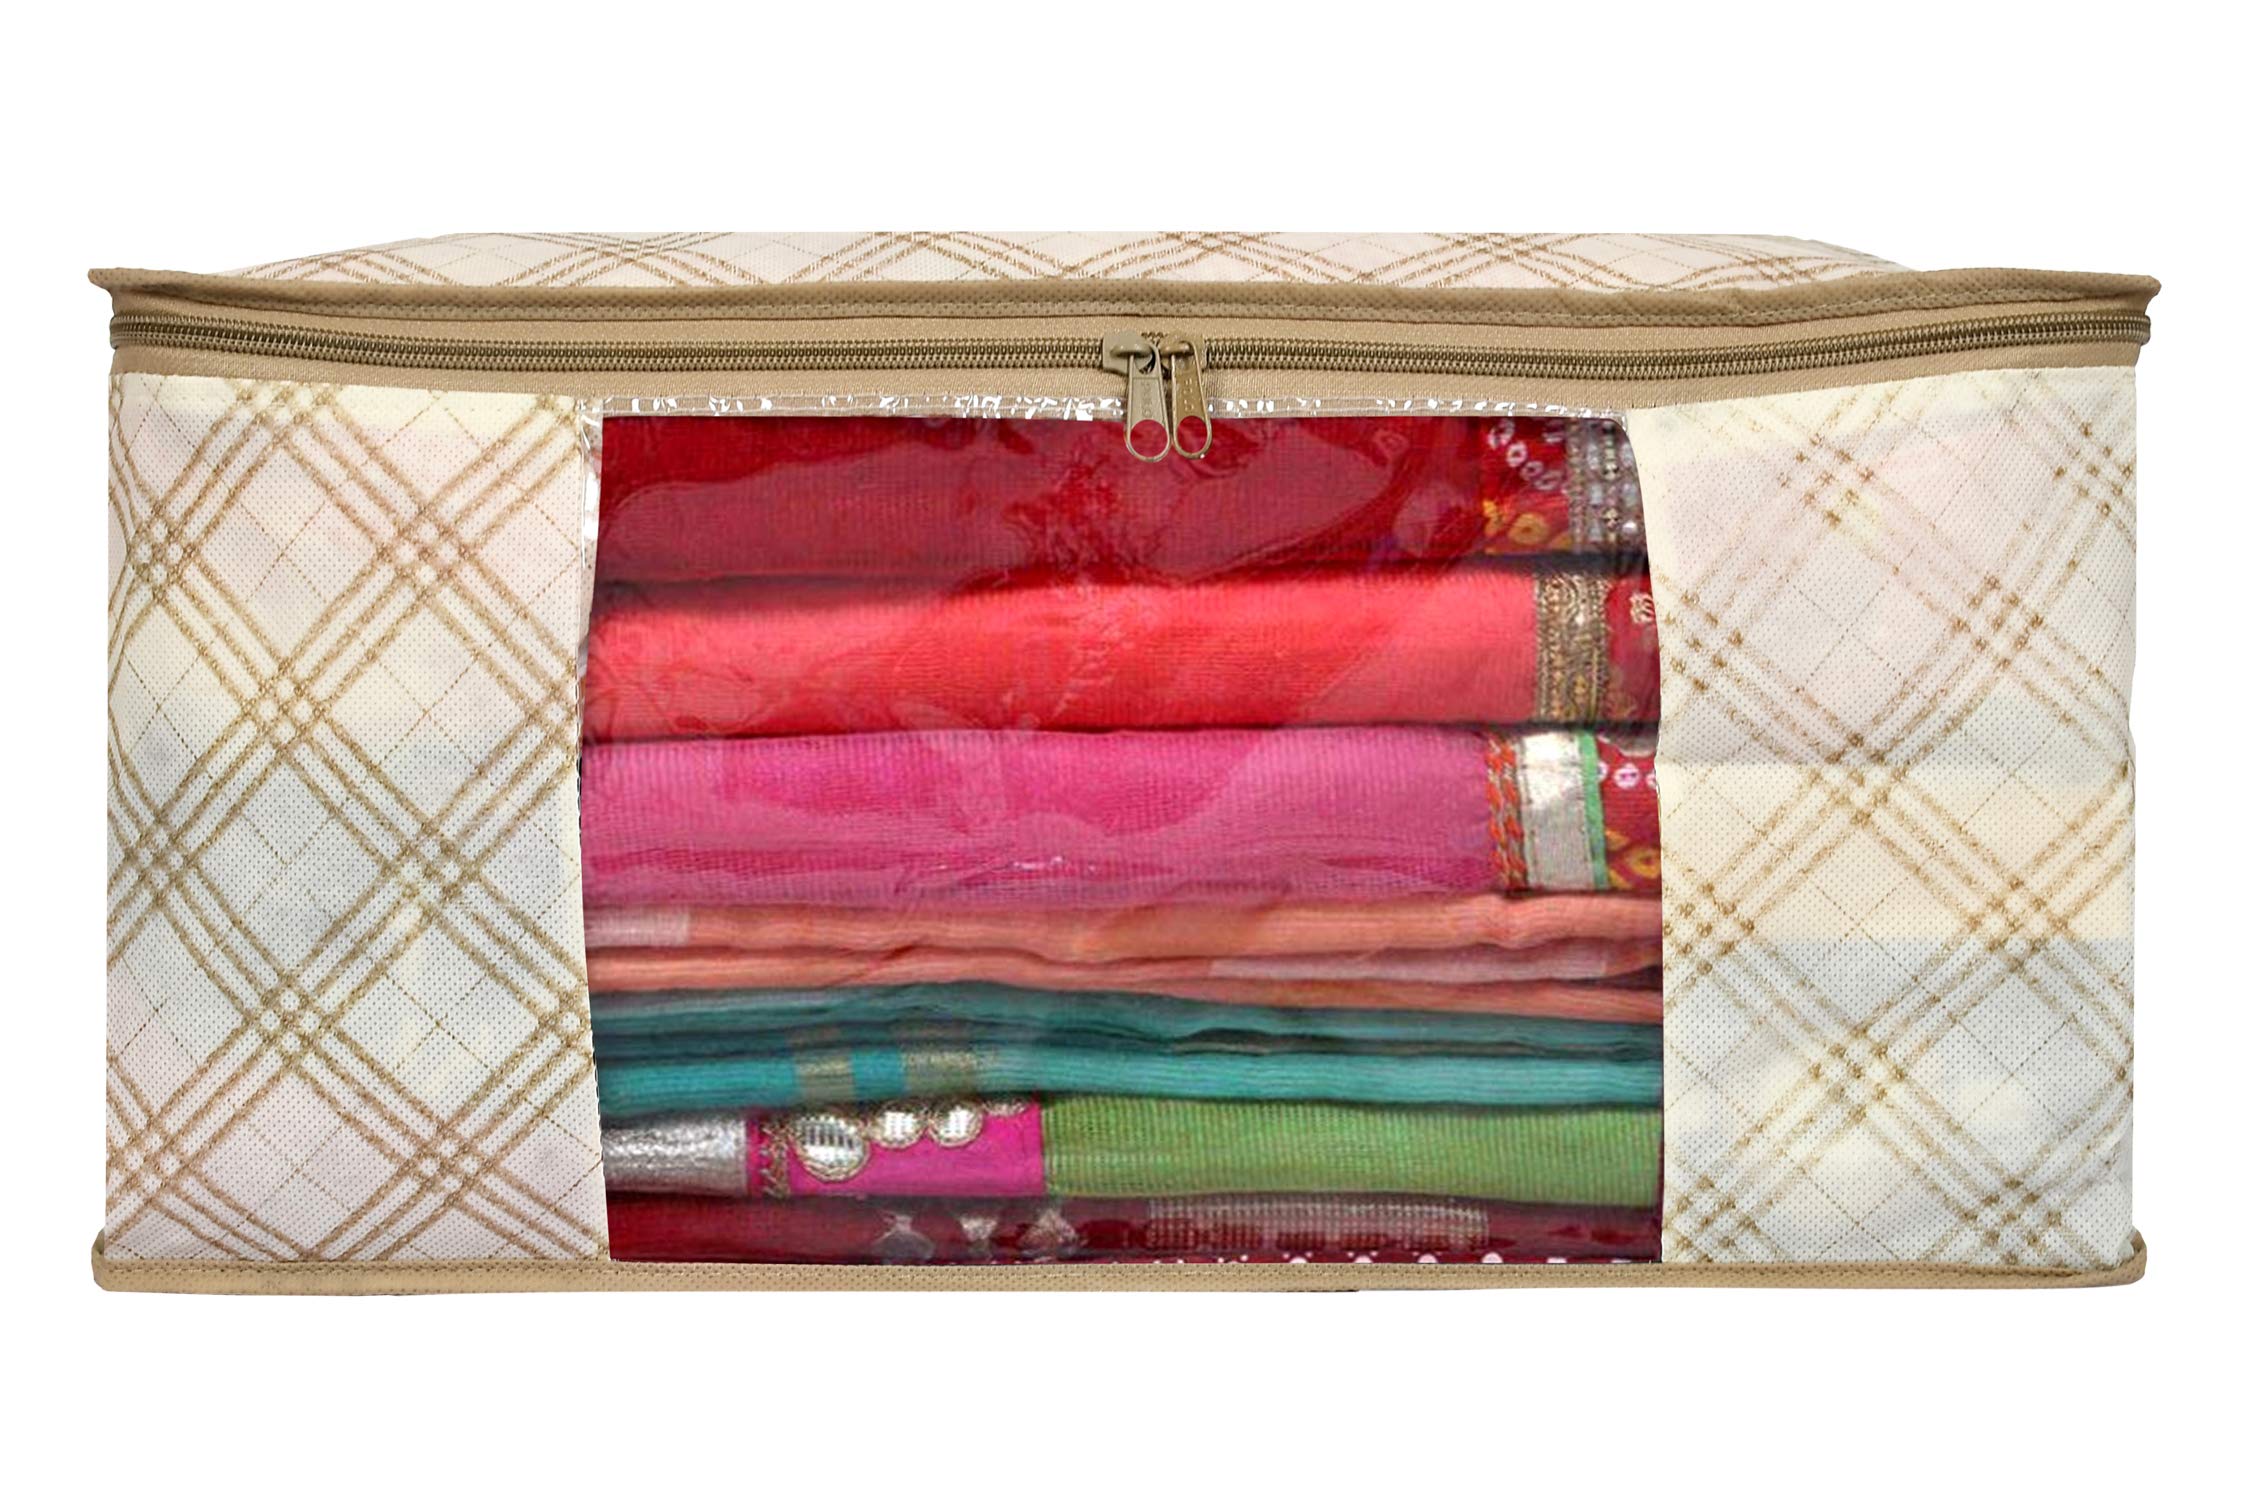 Kuber Industries Metalic Checkered Print Non-woven Foldable Saree Cover|Storage Bag/Wardrobe Organizer|Zipper Closer With Transparent Window|Size 46 x 32 x 22 CM|Pack of 3 (Ivory)-KUBMART16504, cotton